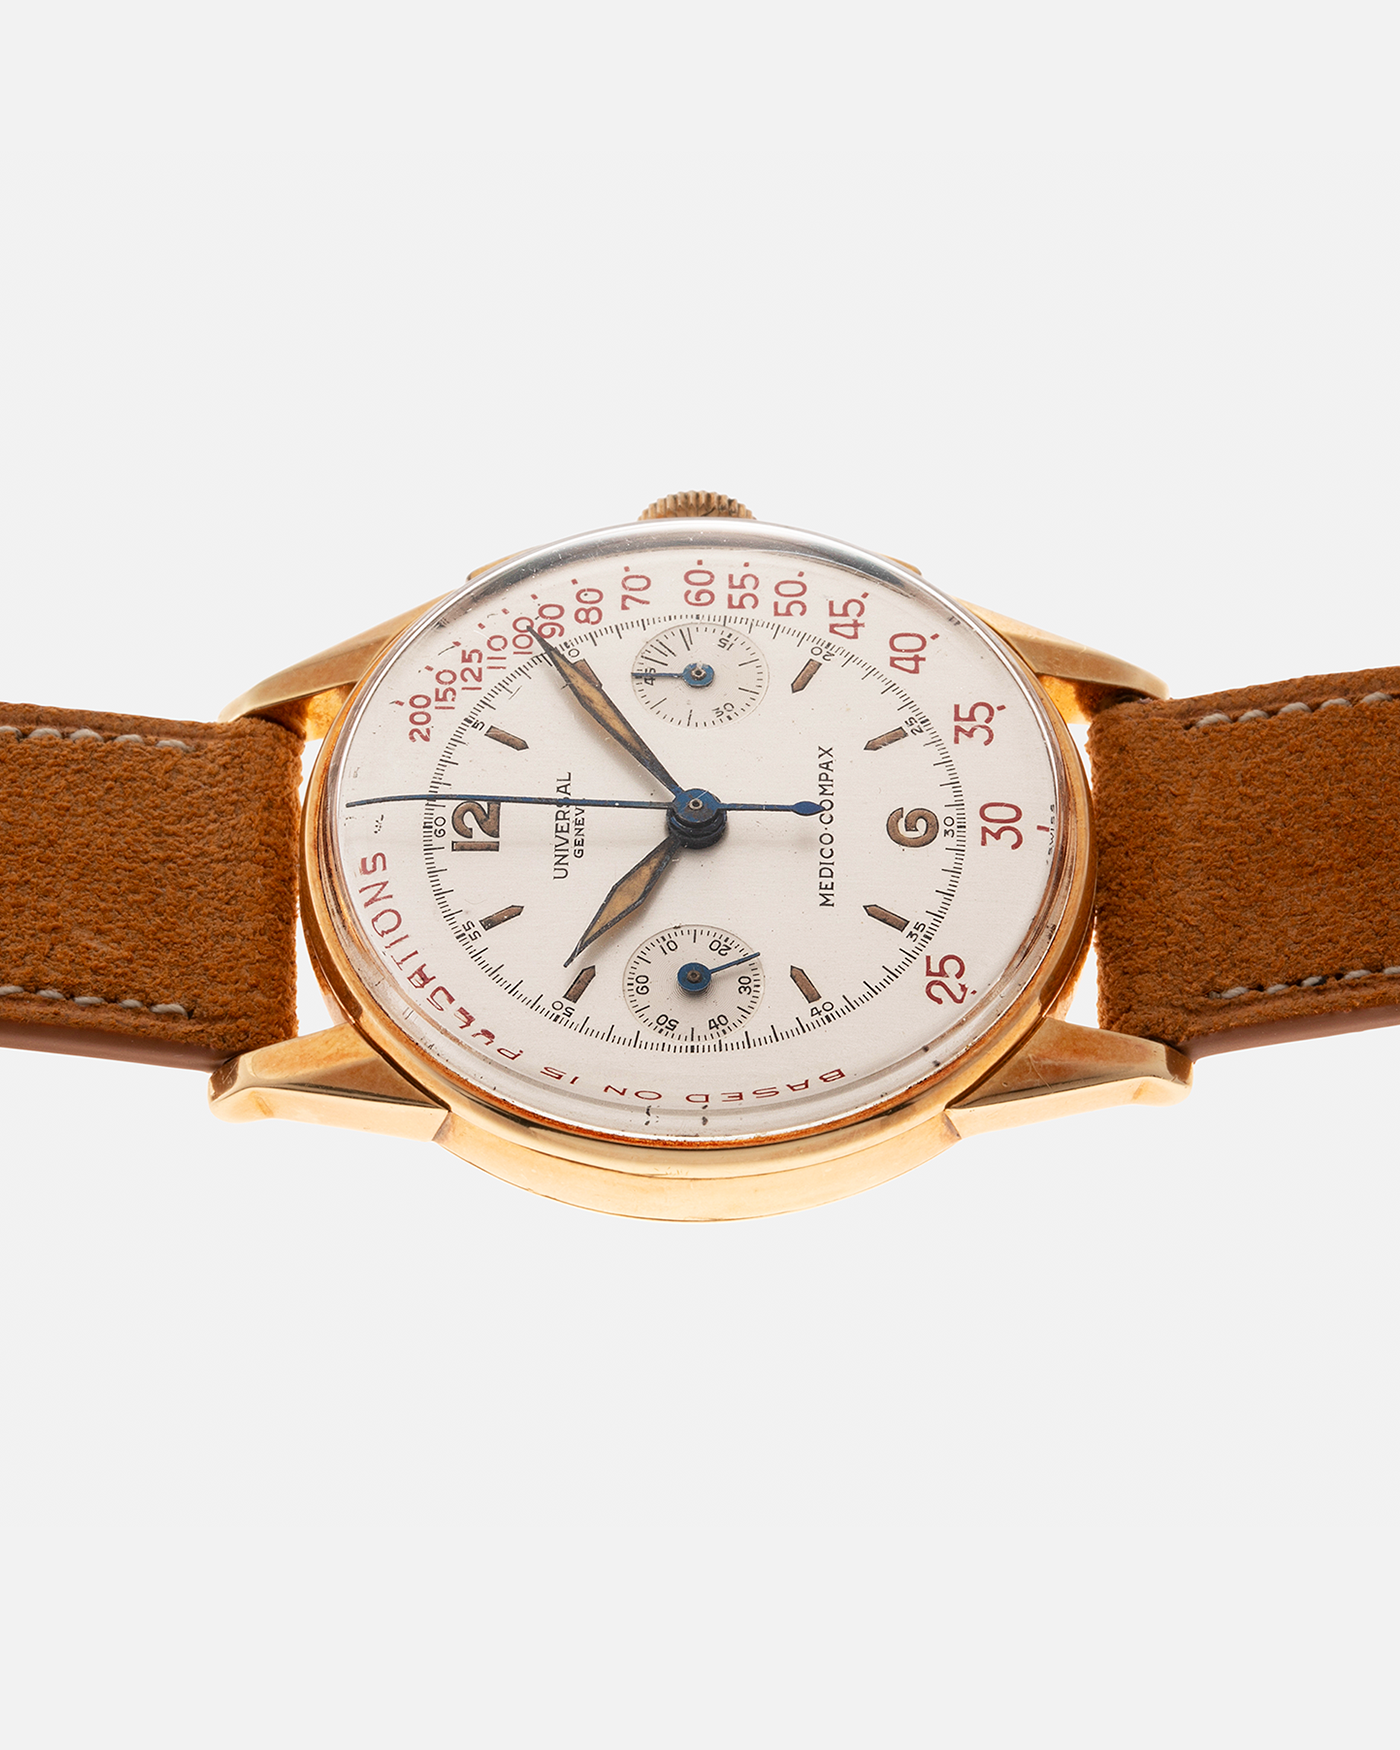 Brand: Universal Genève Year: 1940’s Reference Number: 12426 Material: 18-carat Yellow Gold Movement: Universal Genève Cal. 285, Manual-Winding Case Diameter: 35mm Strap: Nostime Brown Suede Leather Strap